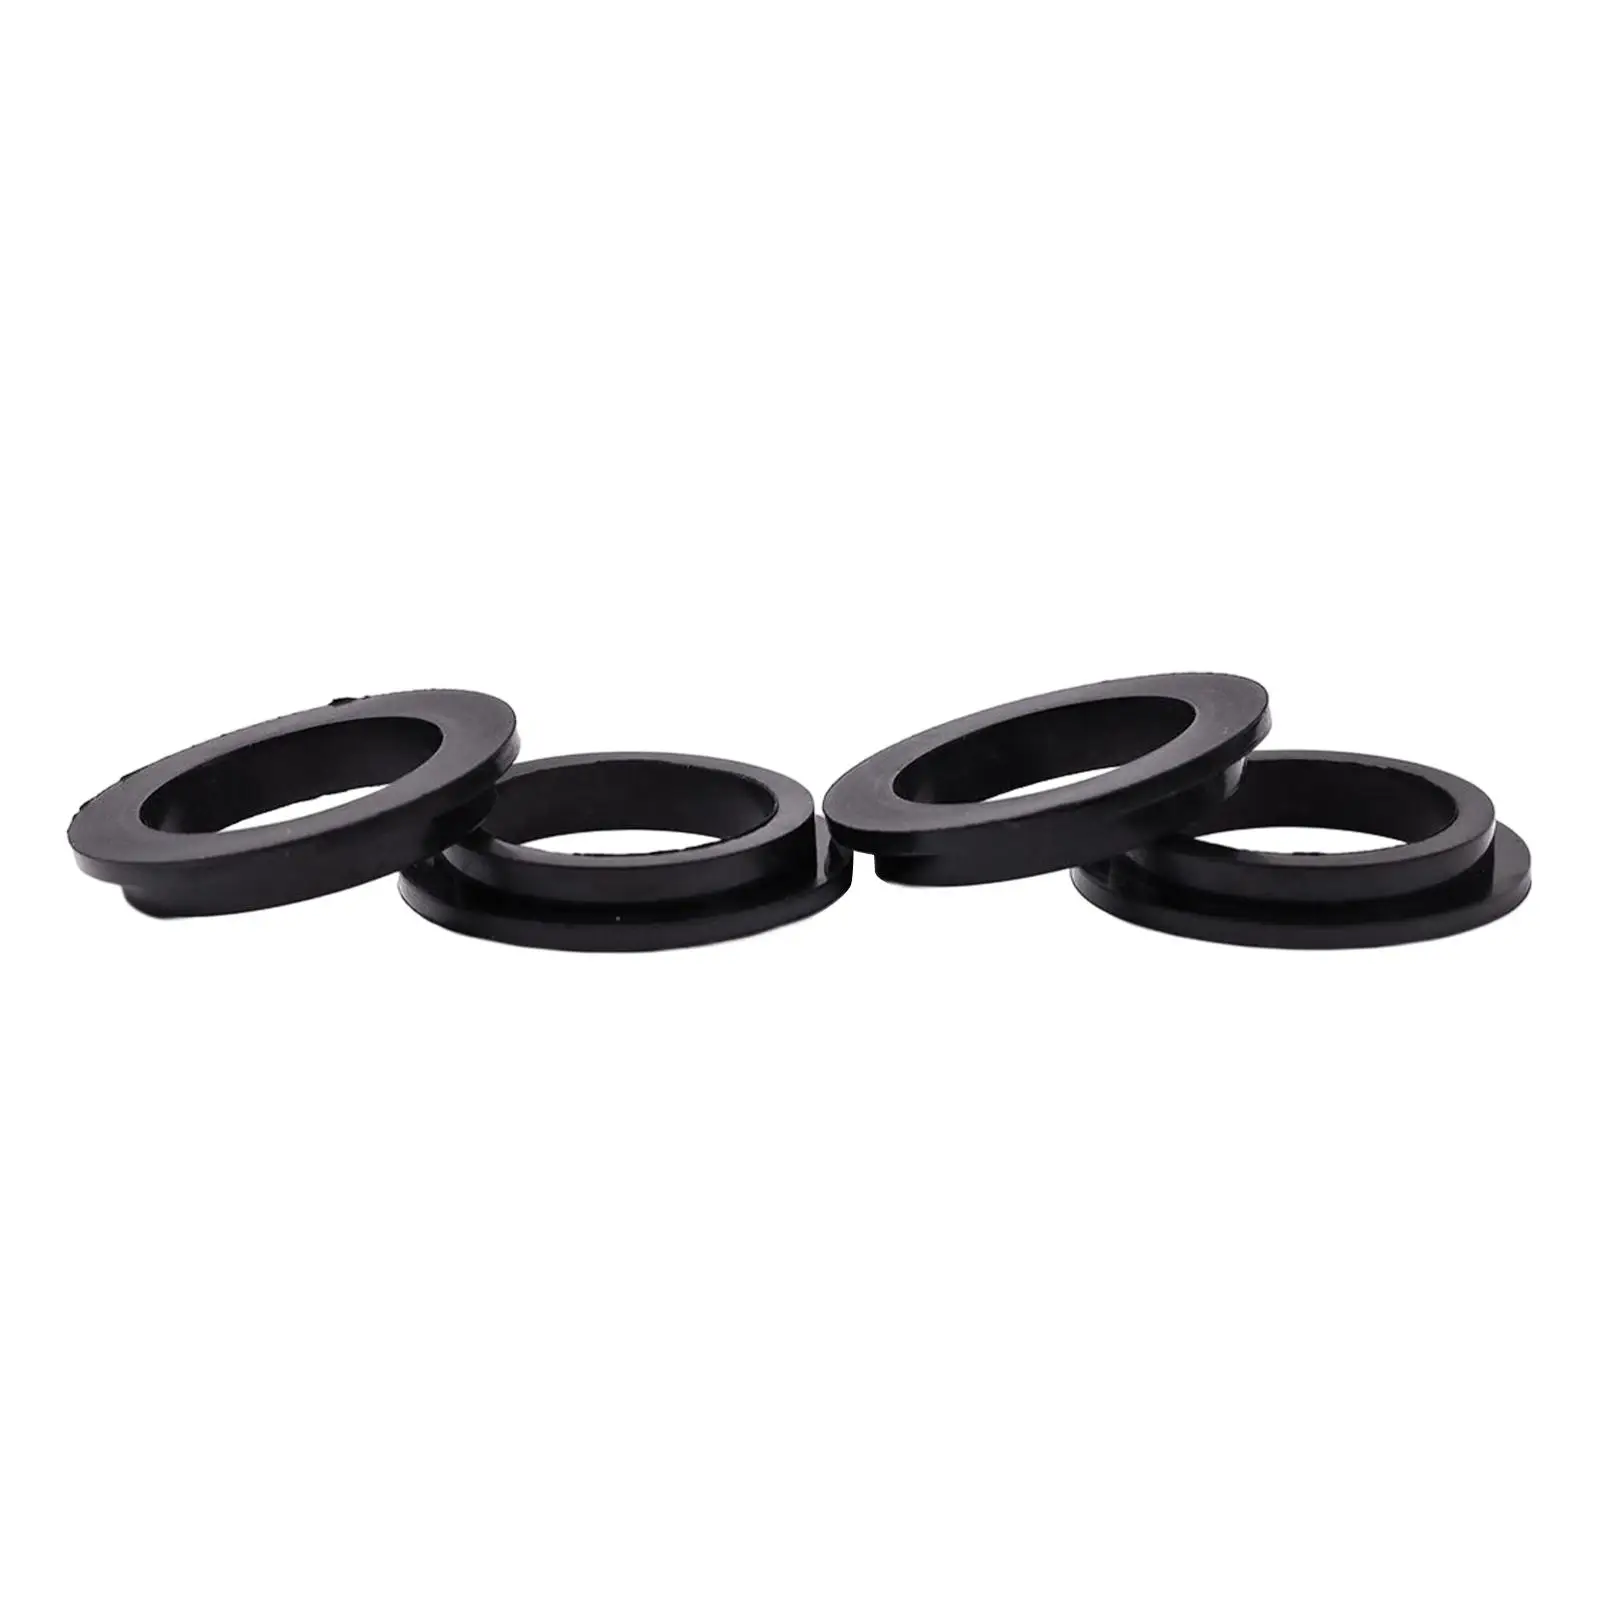 4x O Rings for Sand Filter Pump Part Number 11412 Replacement L Shaped Repair for Sand Filter Pump Pool Filter Pump O Rings